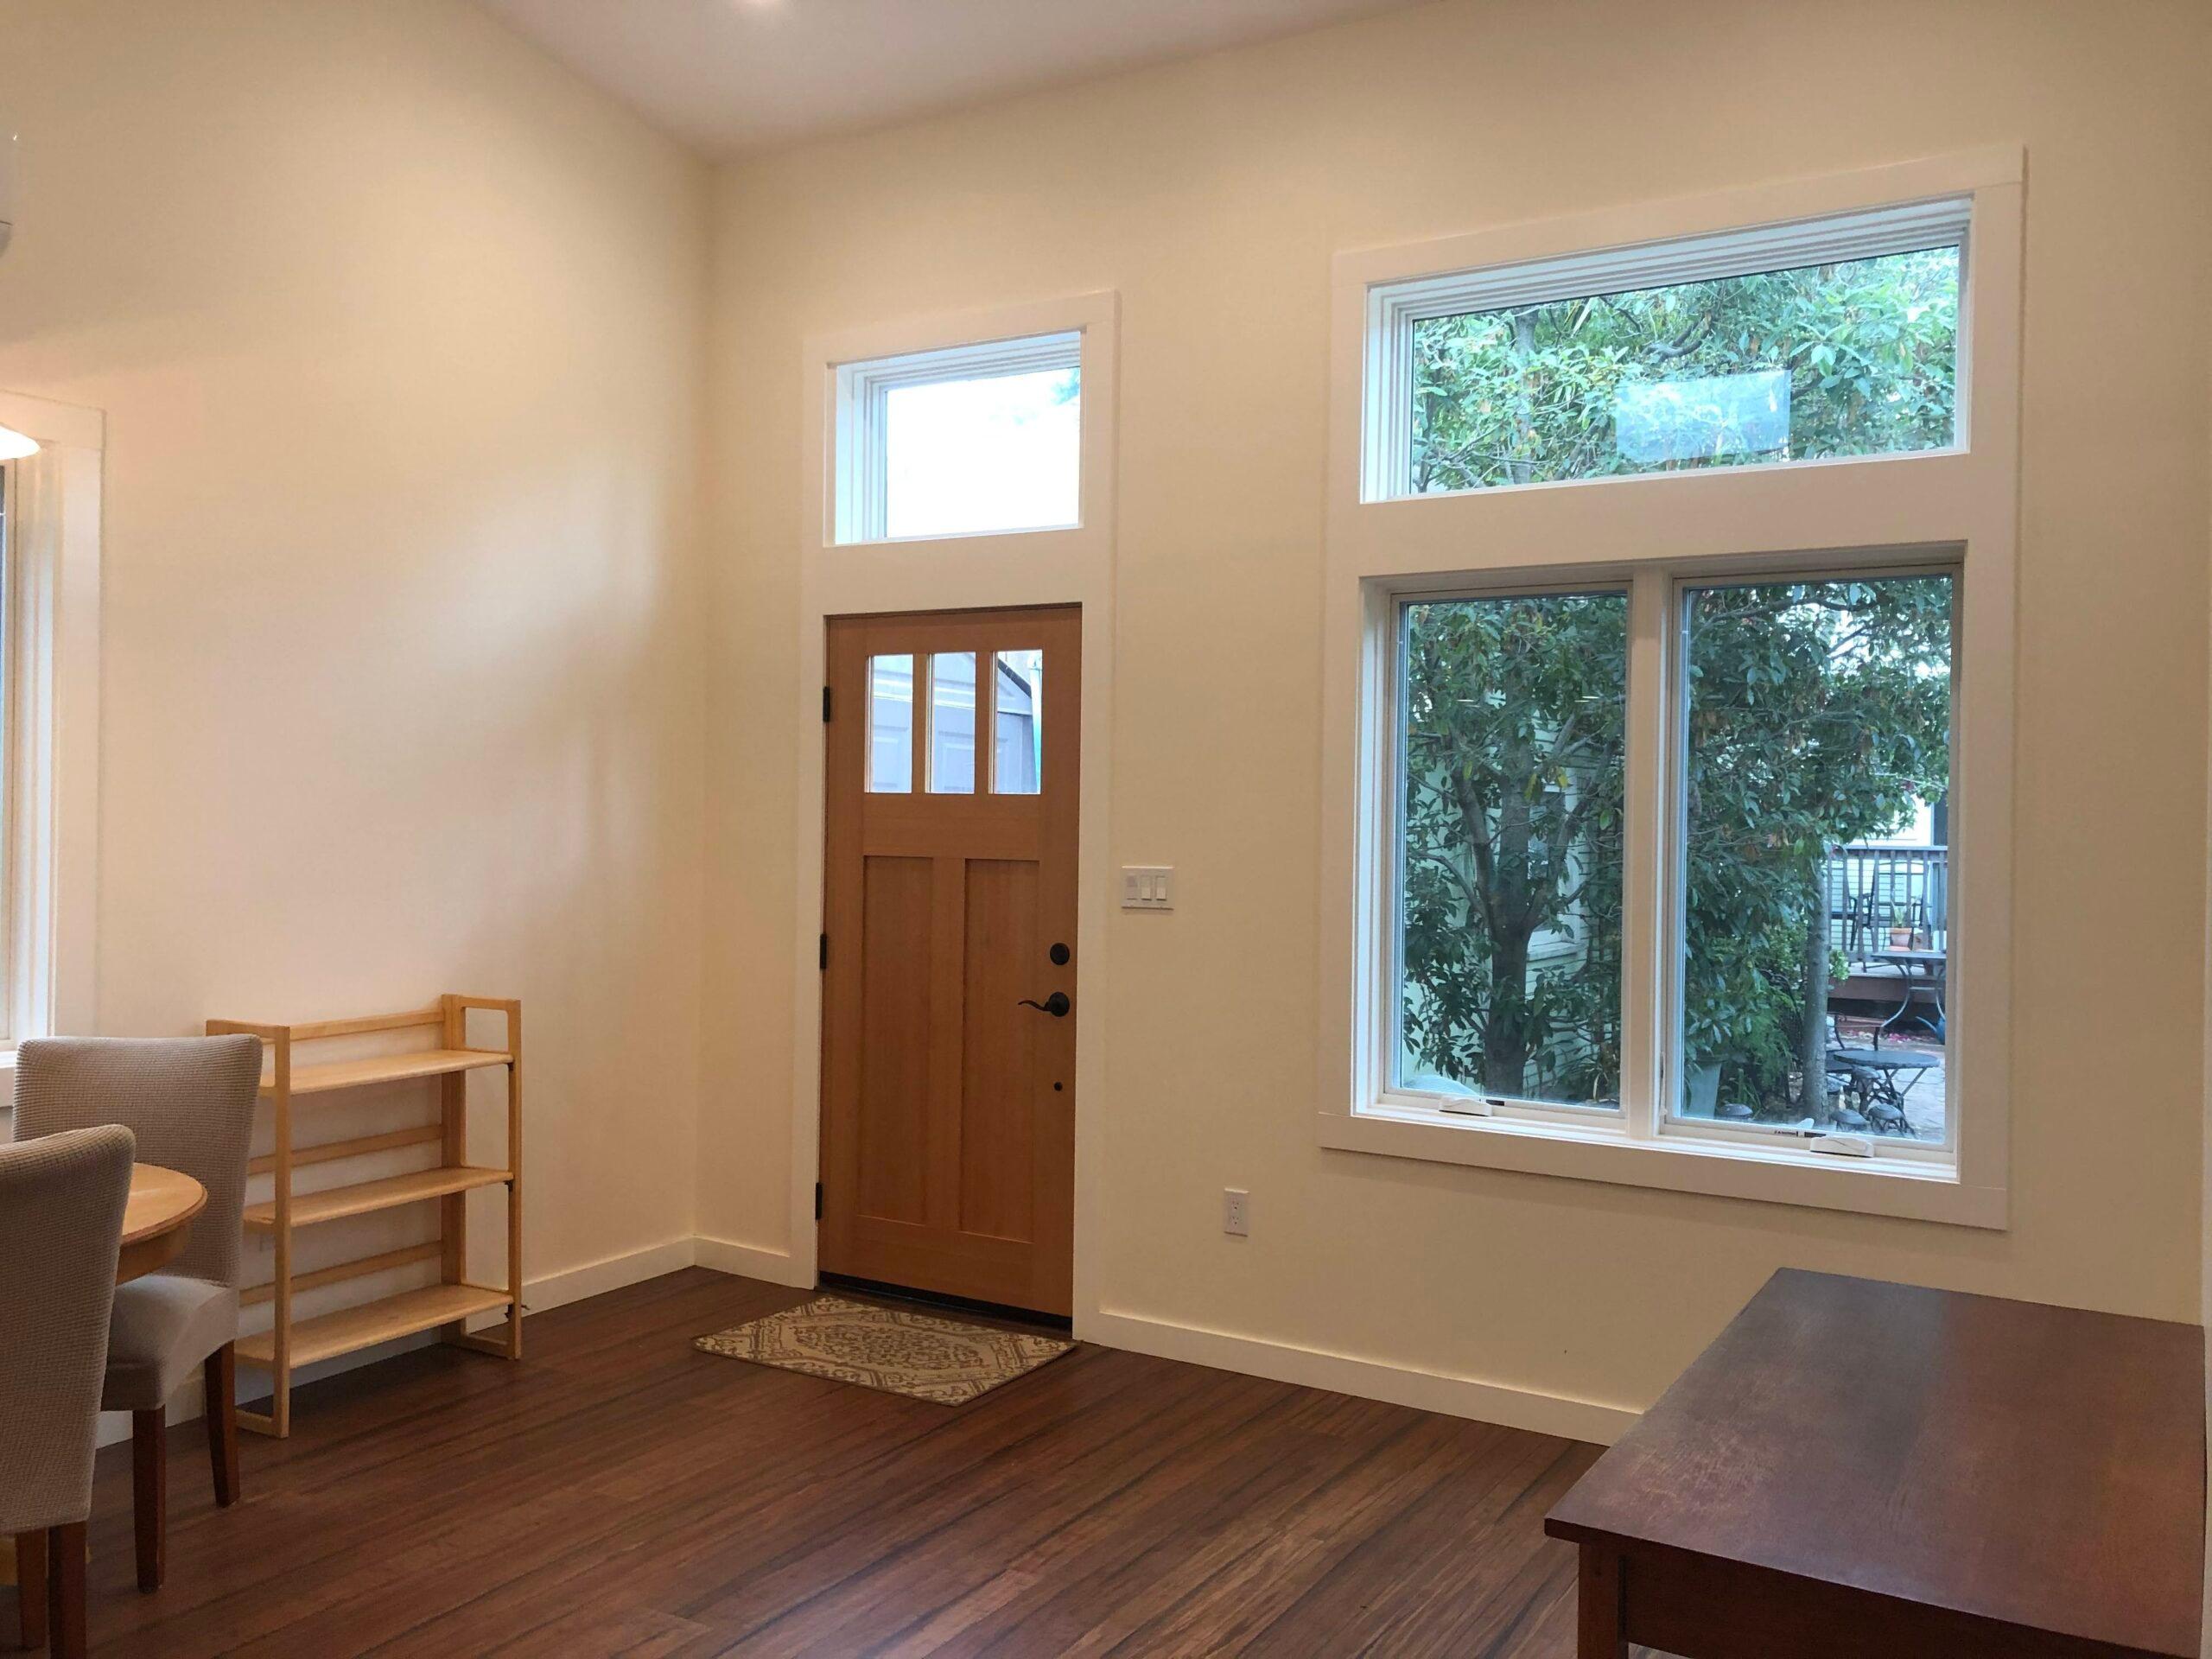 Picture of Green Living Builders transformed this living space by installing windows to bring in more light. - Green Living Builders LLC